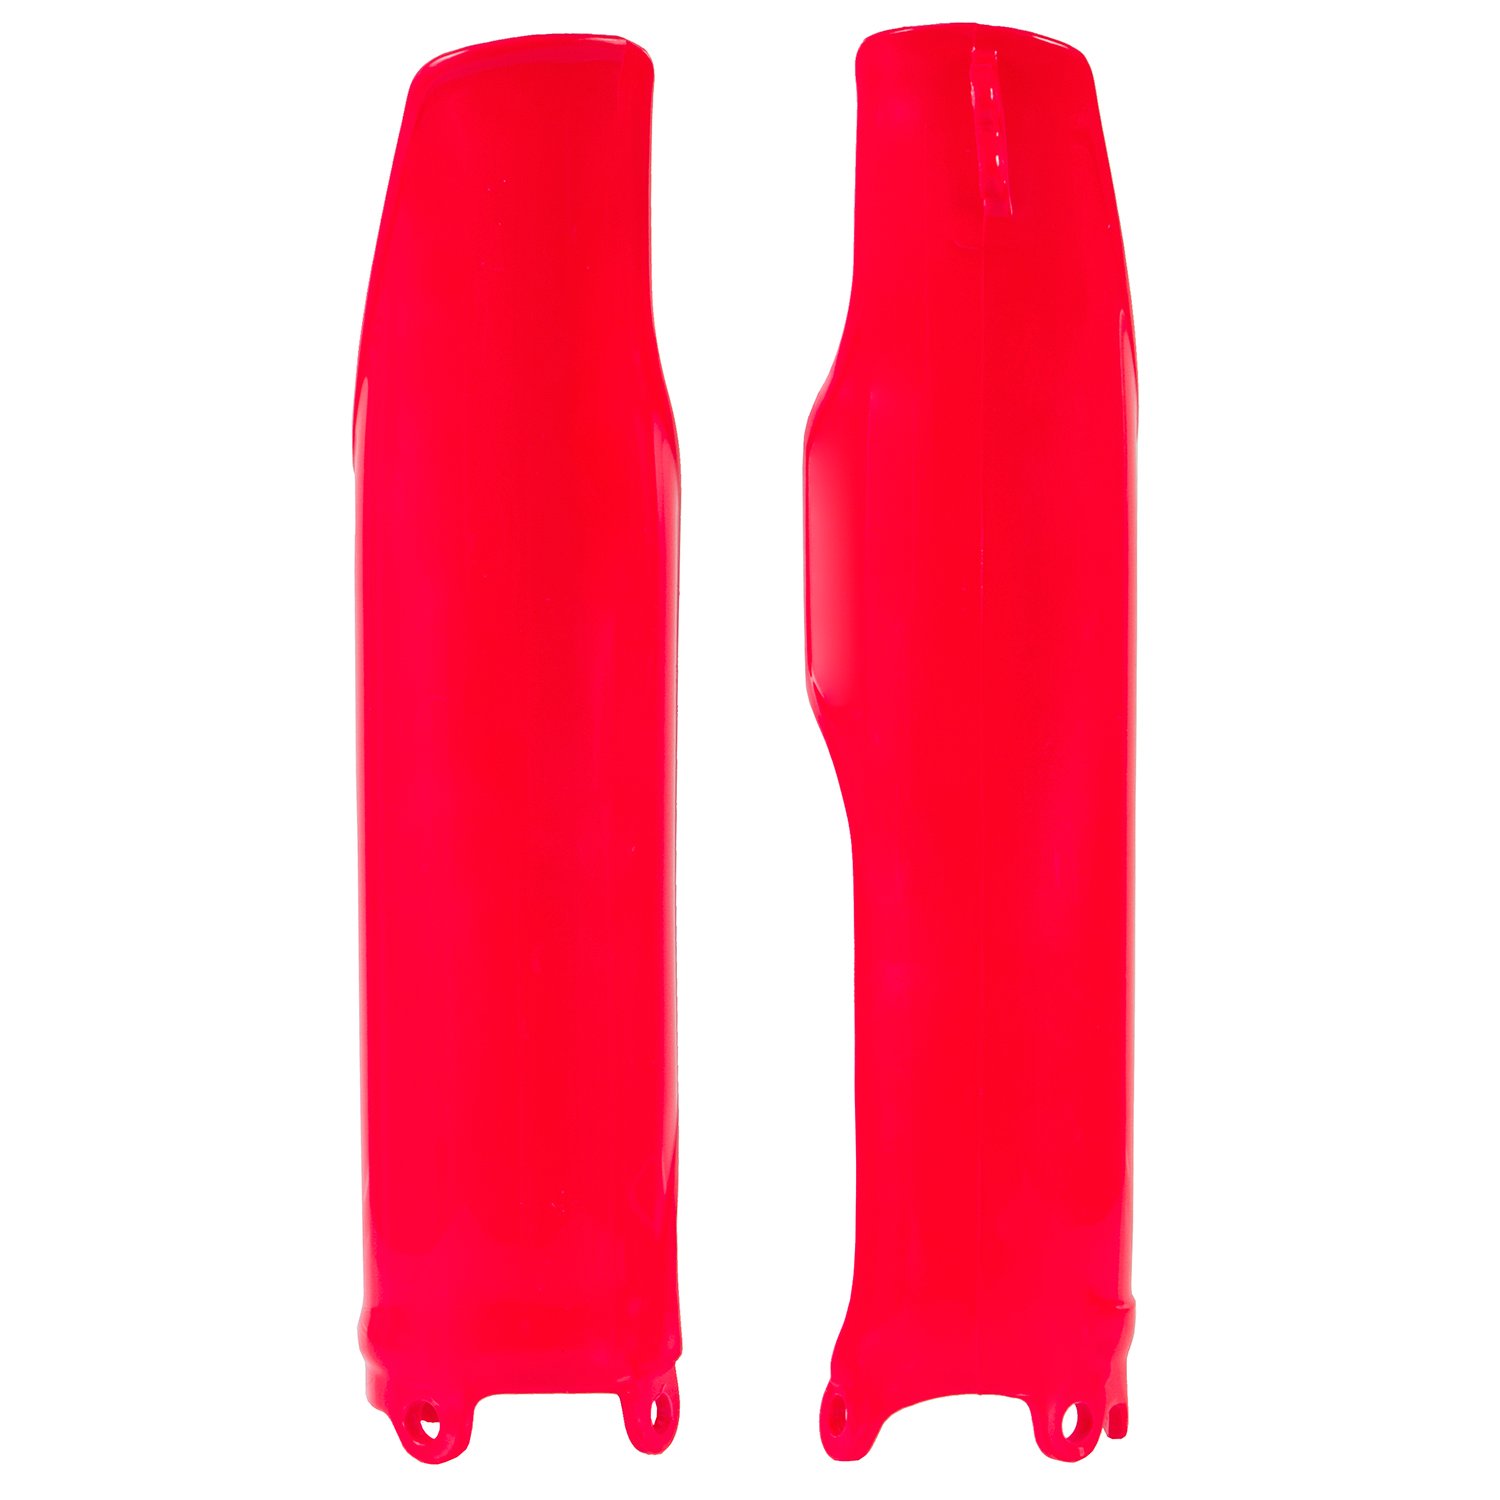 Acerbis Lower Fork Covers  Honda CRF 250 2018, CRF 450 17-18, Red